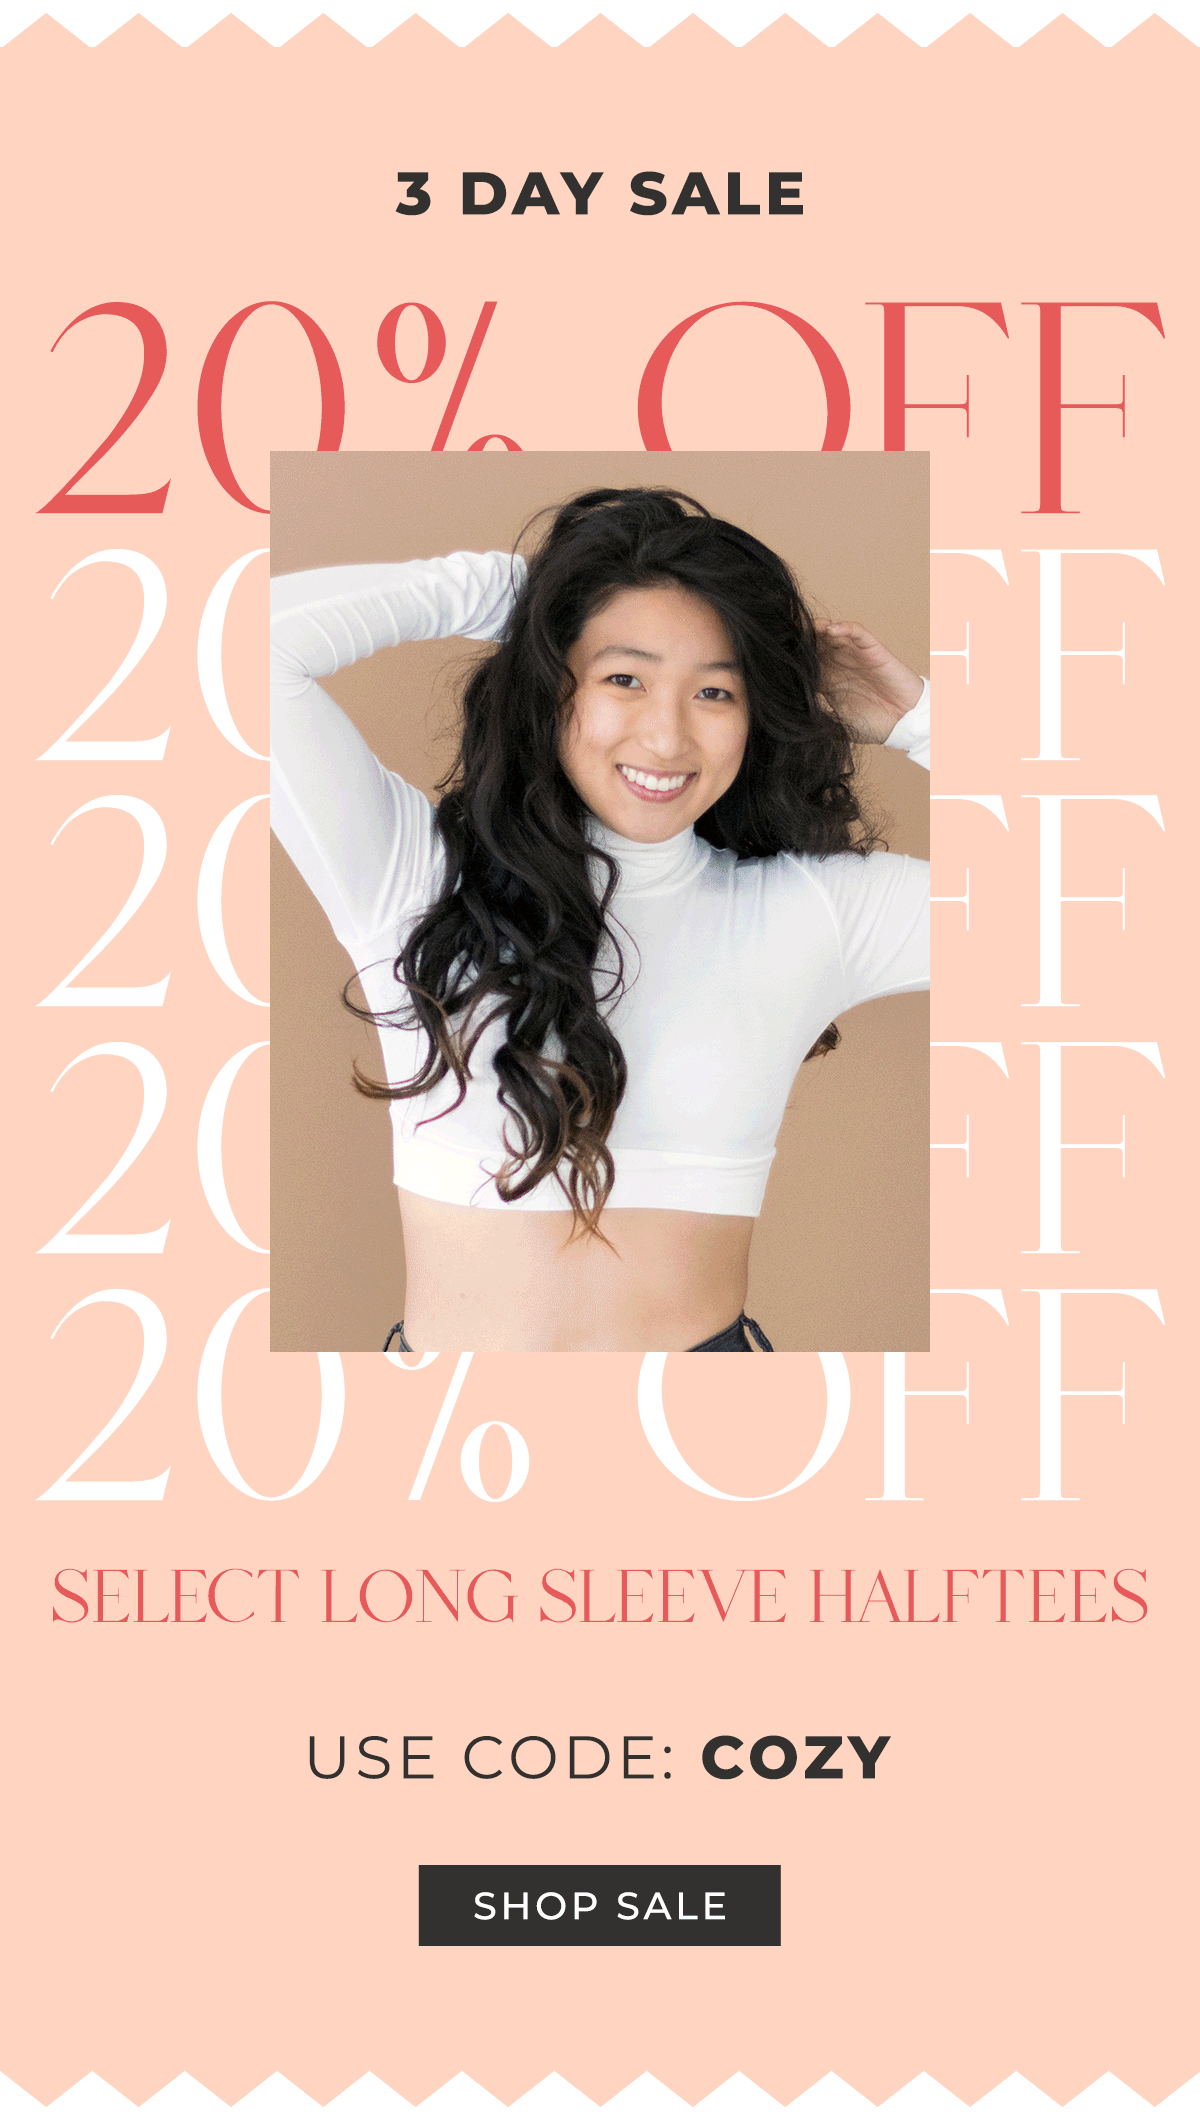 3 Day Sale 20% off Select Long Sleeve Halftees Use Code: COZY